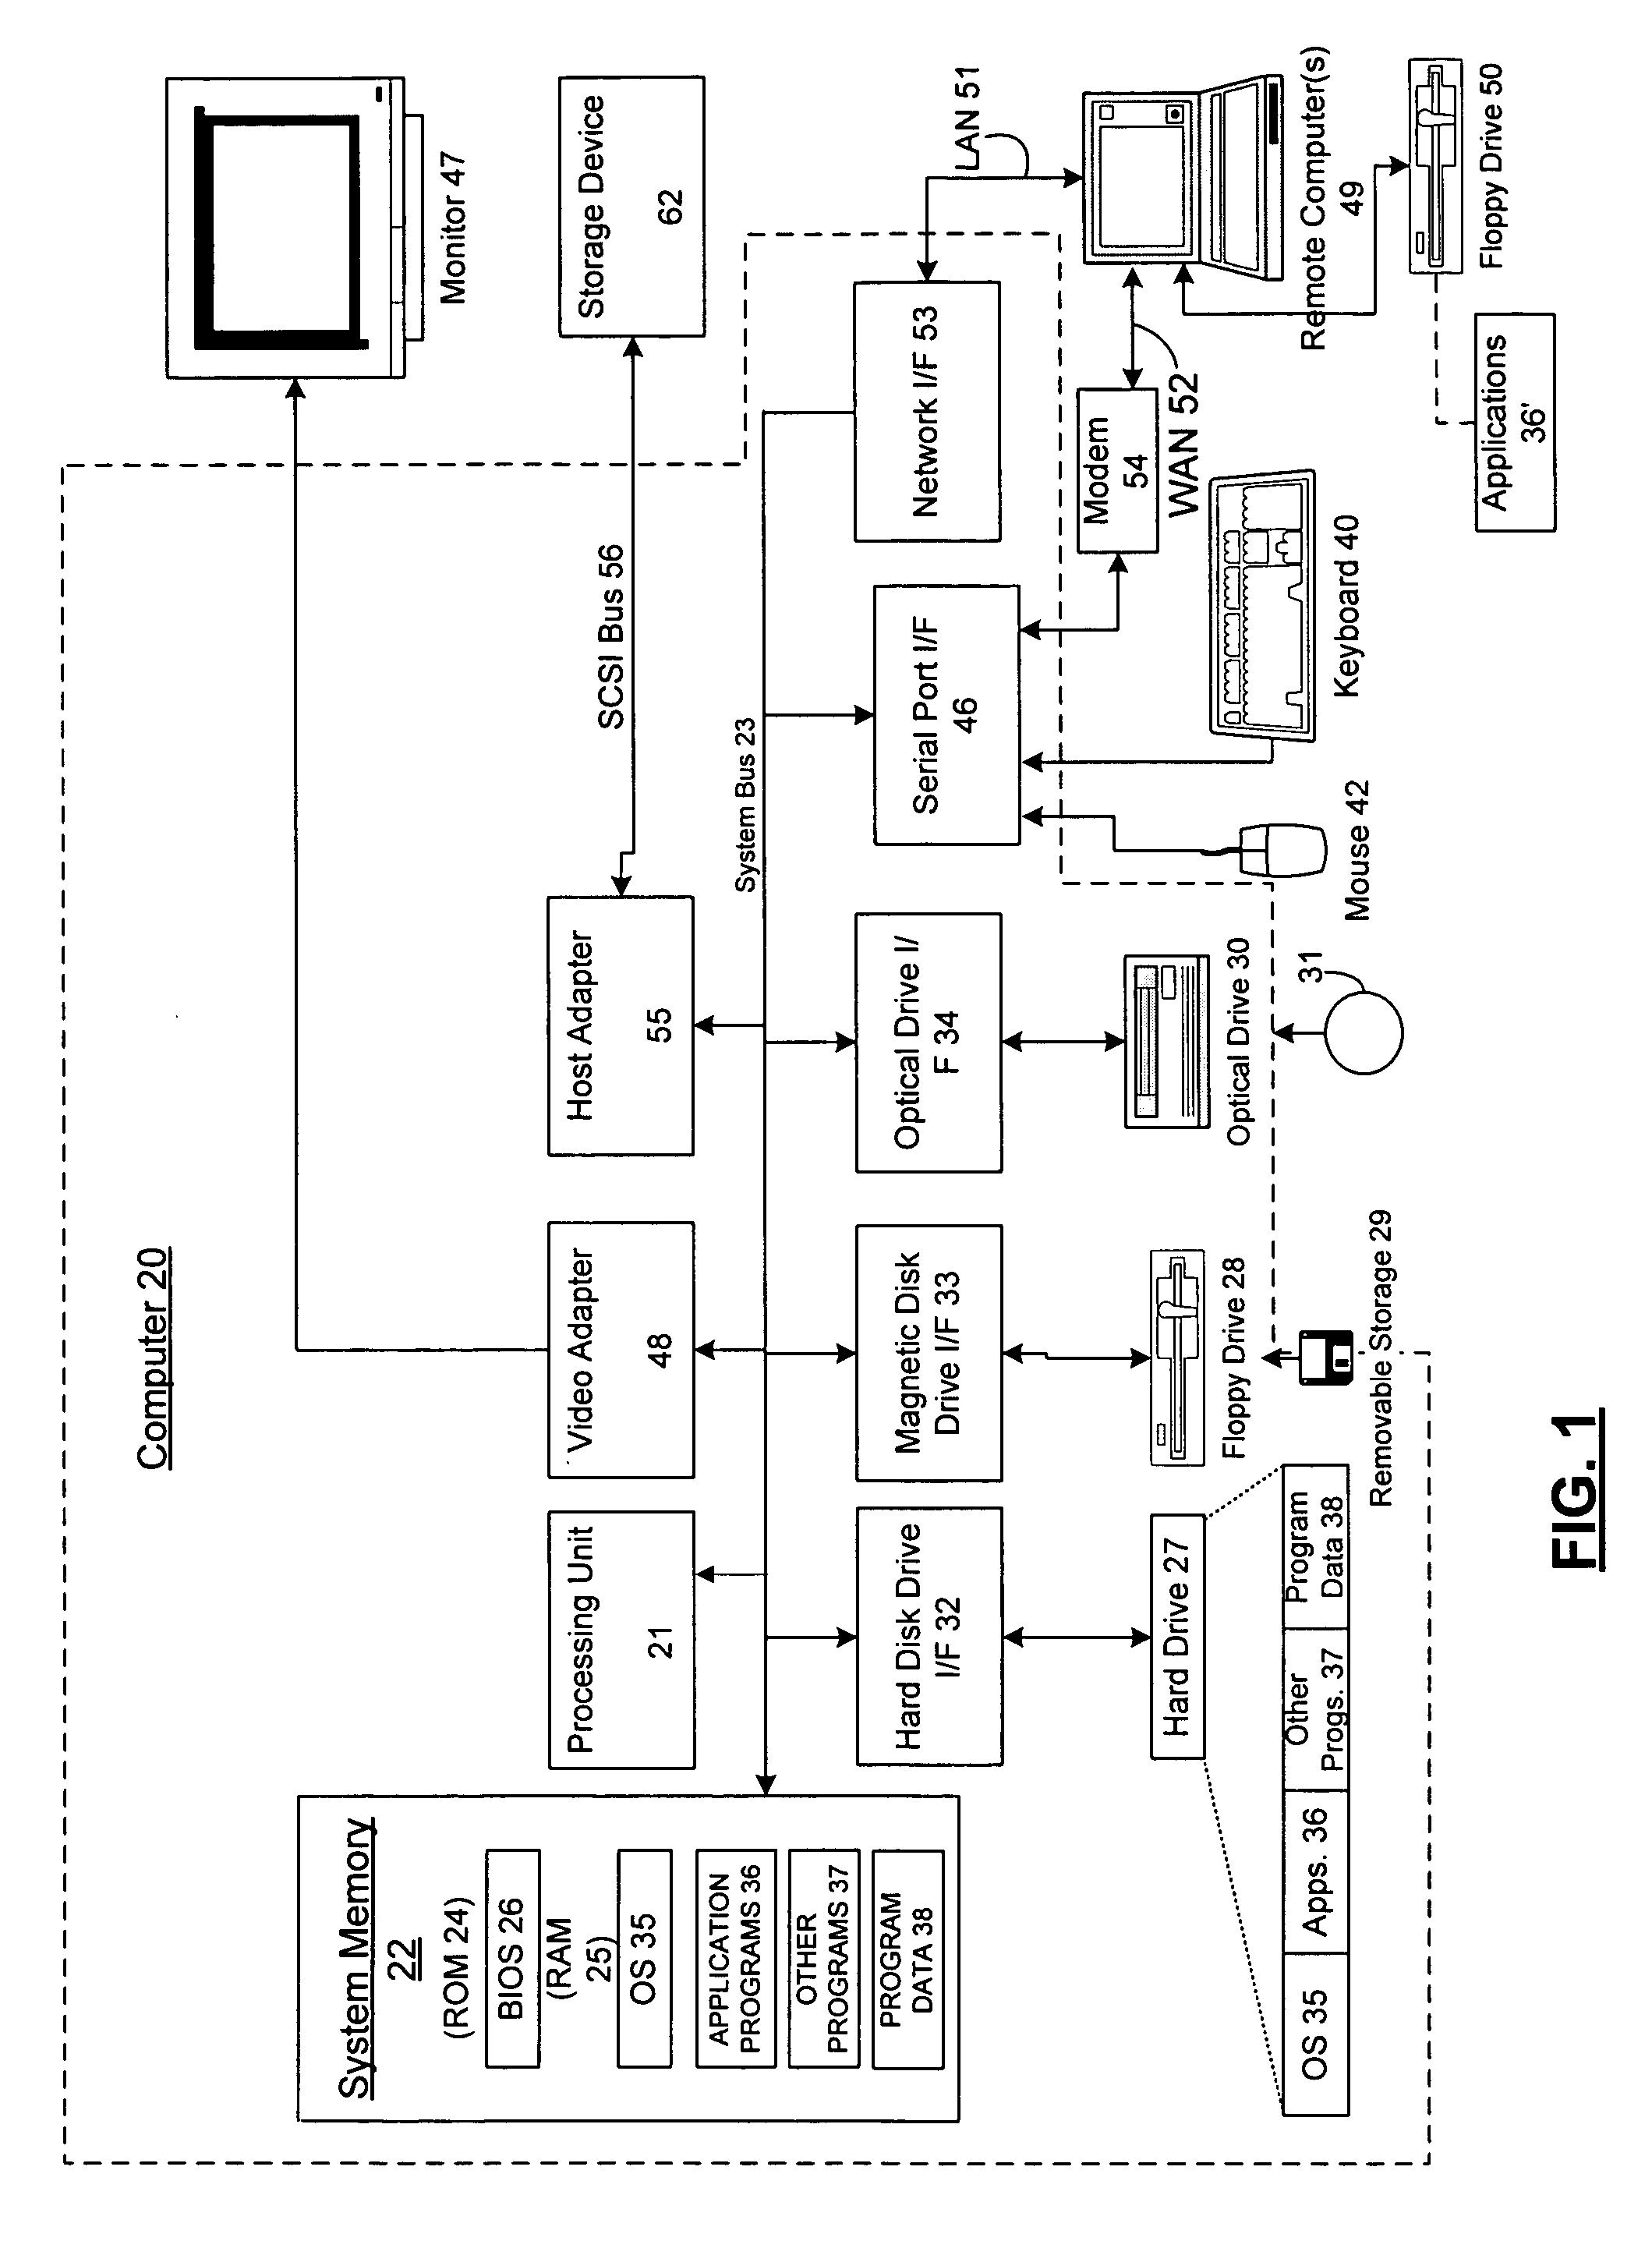 Systems and methods for attaching a virtual machine virtual hard disk to a host machine